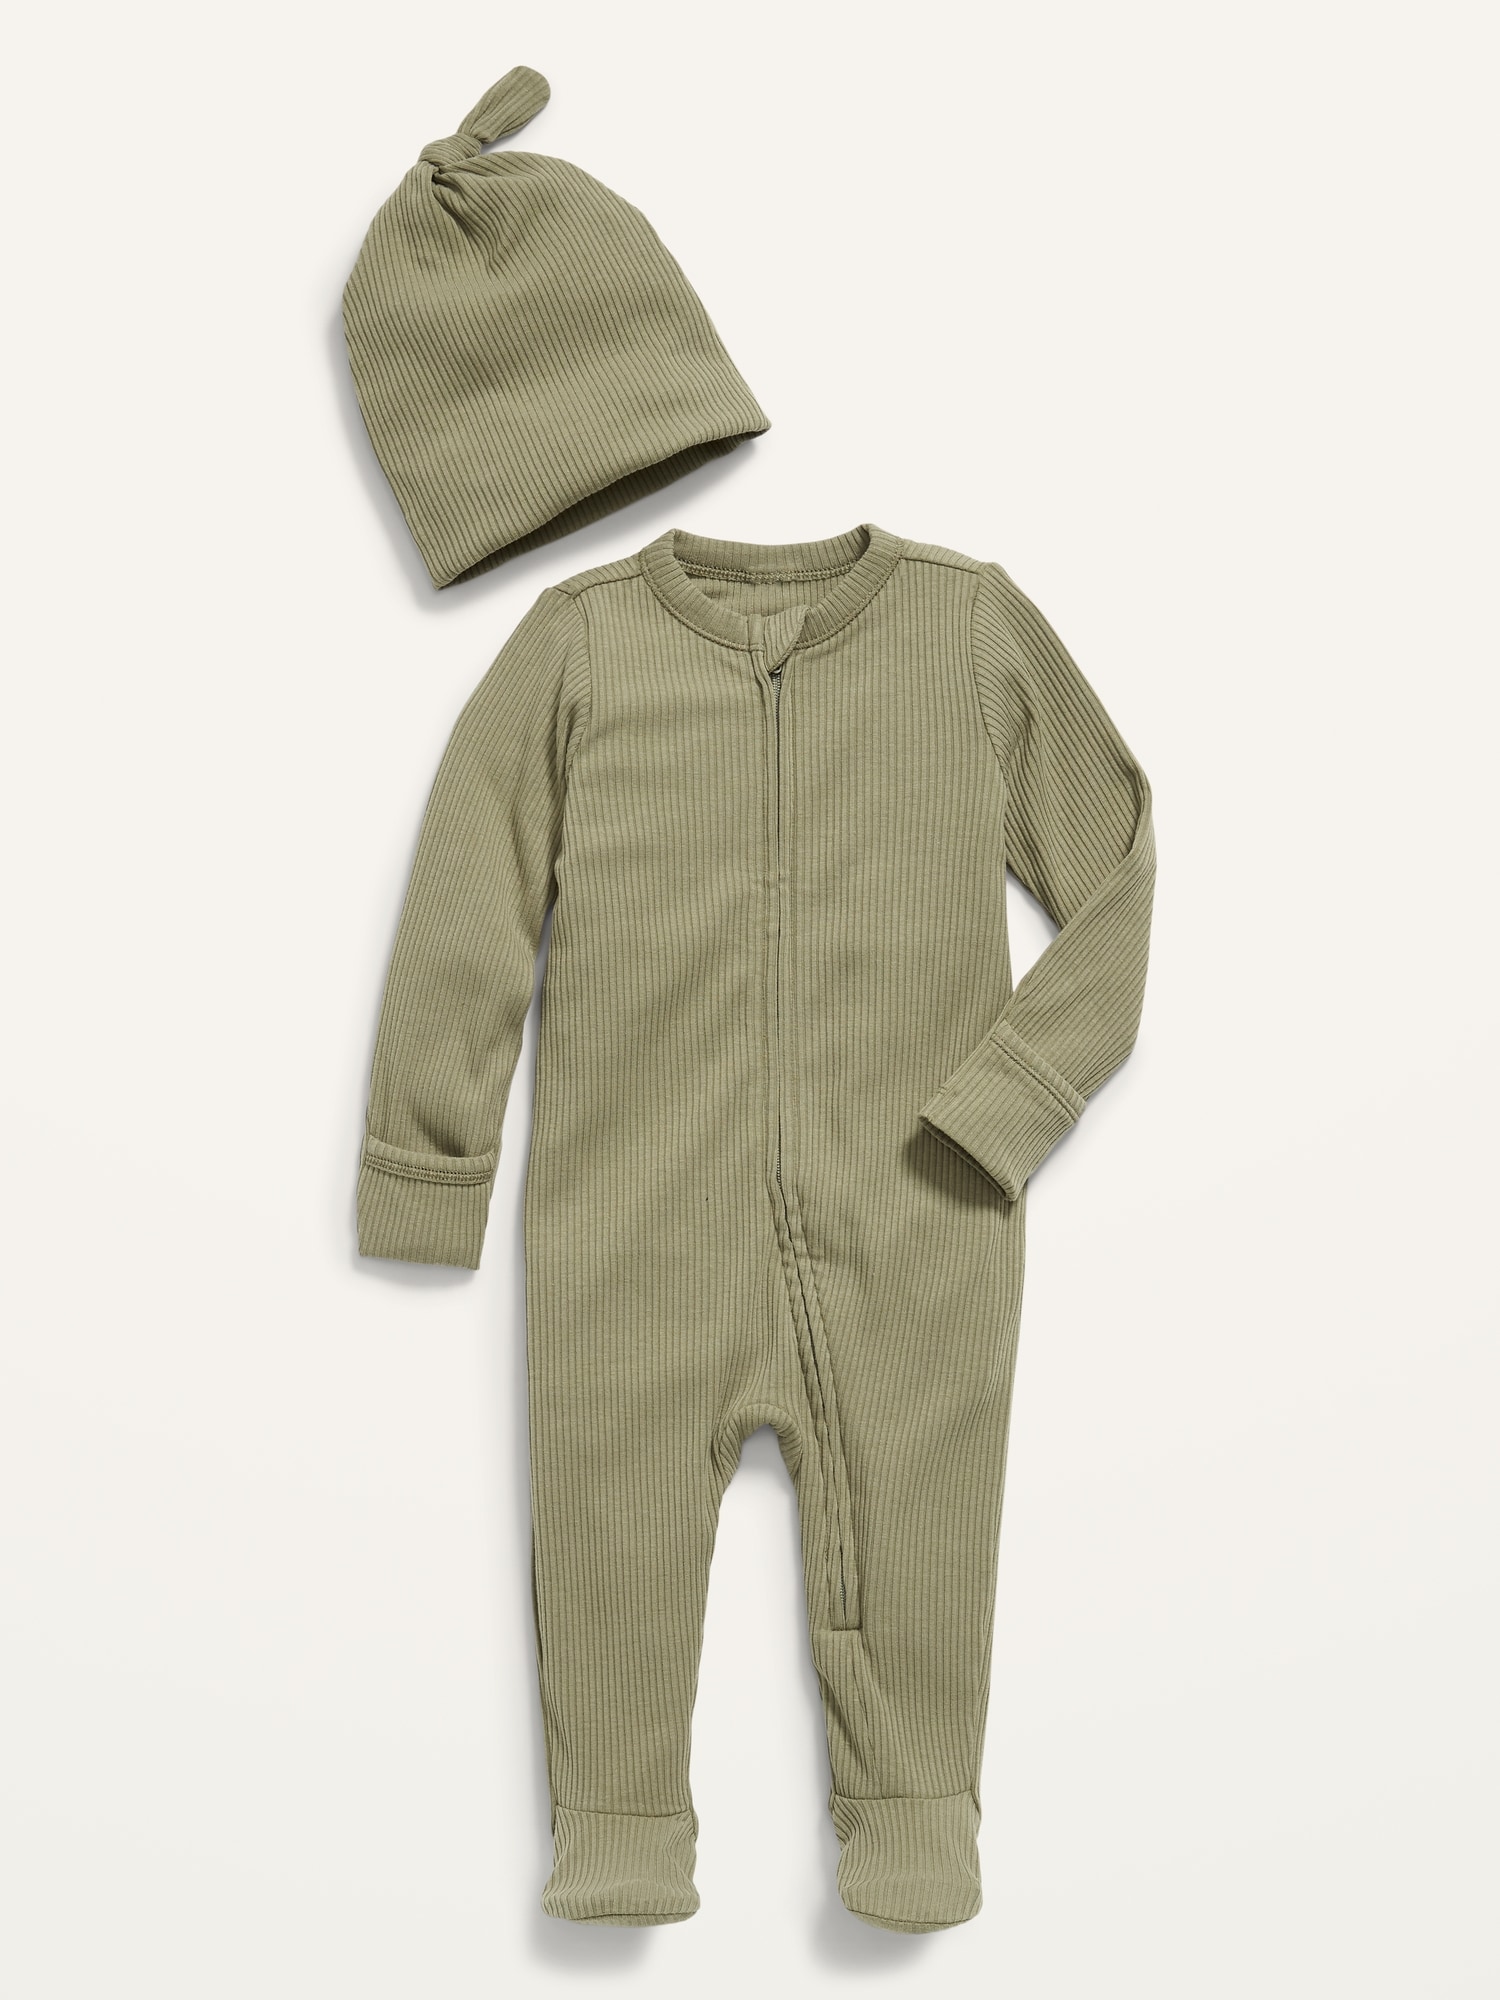 Oldnavy Footed Sleep & Play Rib-Knit One-Piece & Beanie Layette Set for Baby Hot Deal